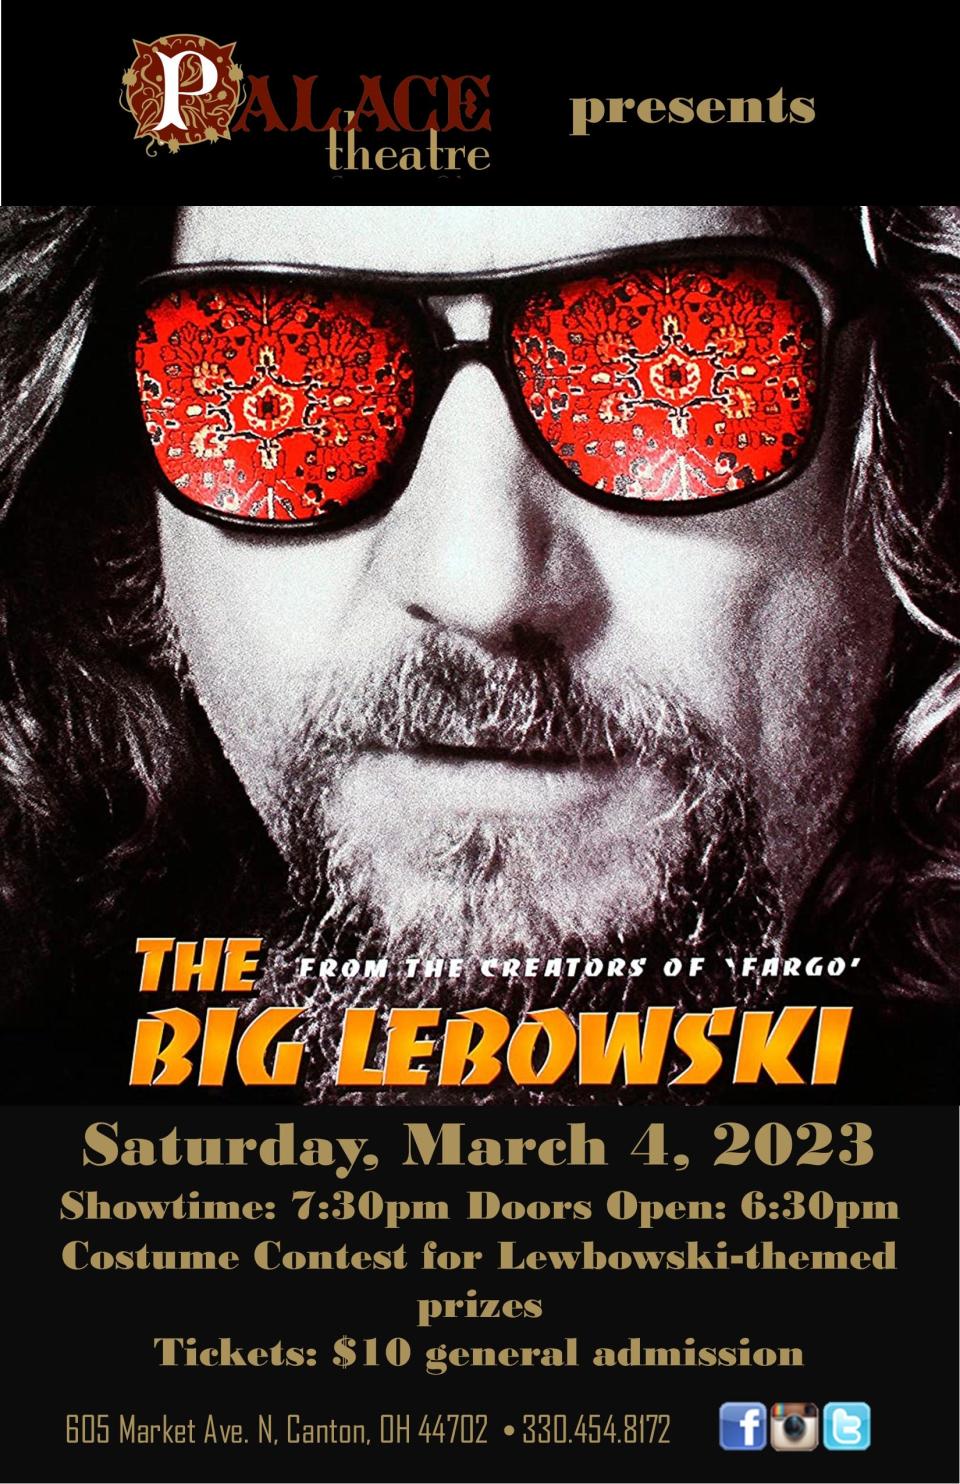 The Canton Palace Theatre will be hosting a special one-night screening of the cult classic movie "The Big Lebowski" at 7:30 pm. Saturday. A costume contest is at 7 p.m. Lebowski-themed artwork also will be for sale.